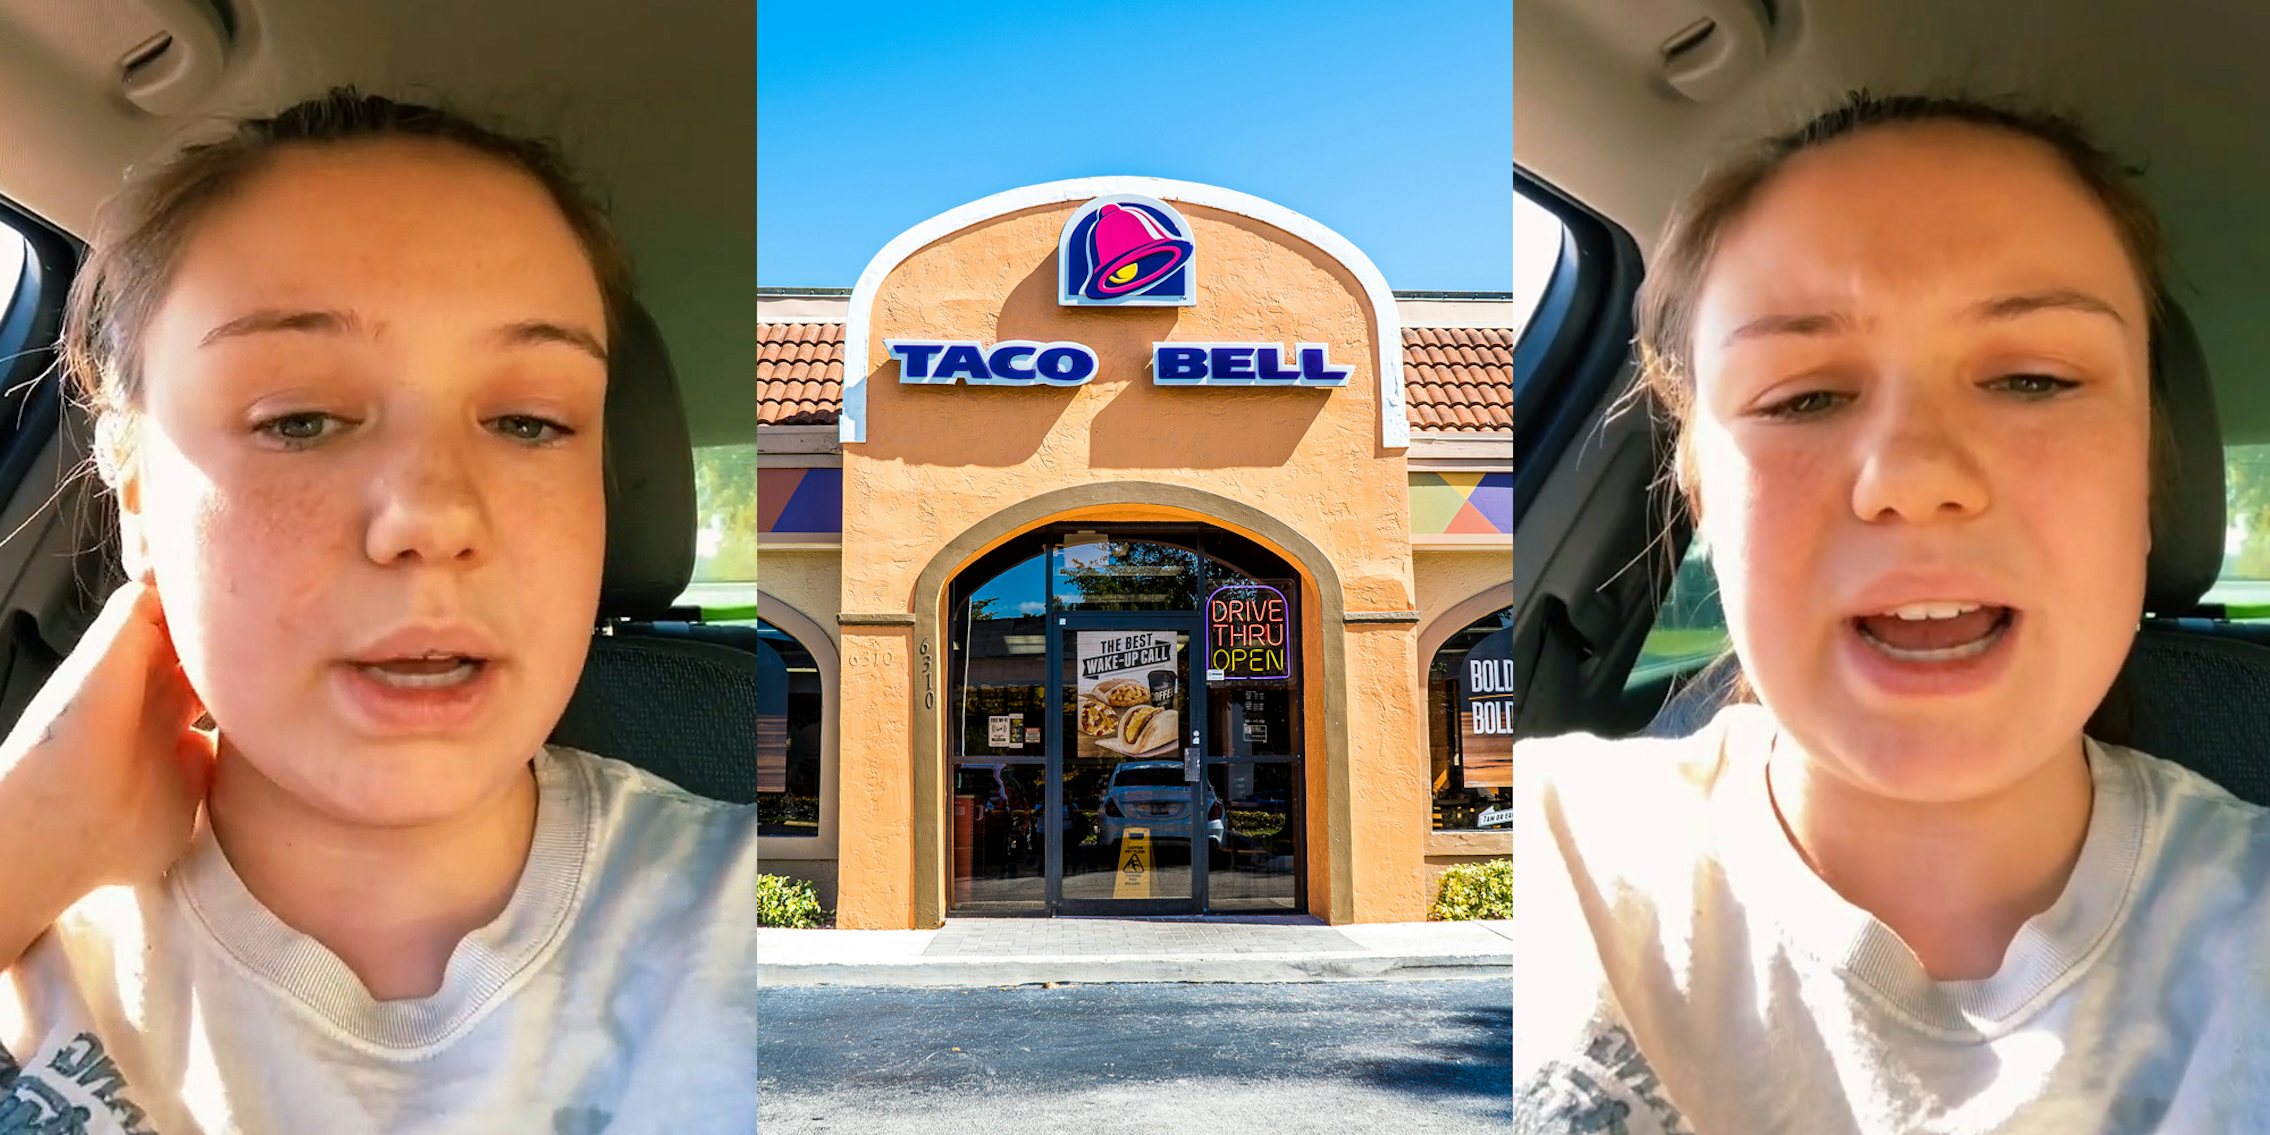 Woman speaking in car (l) Taco bell building with sign (c) woman speaking in car (r)